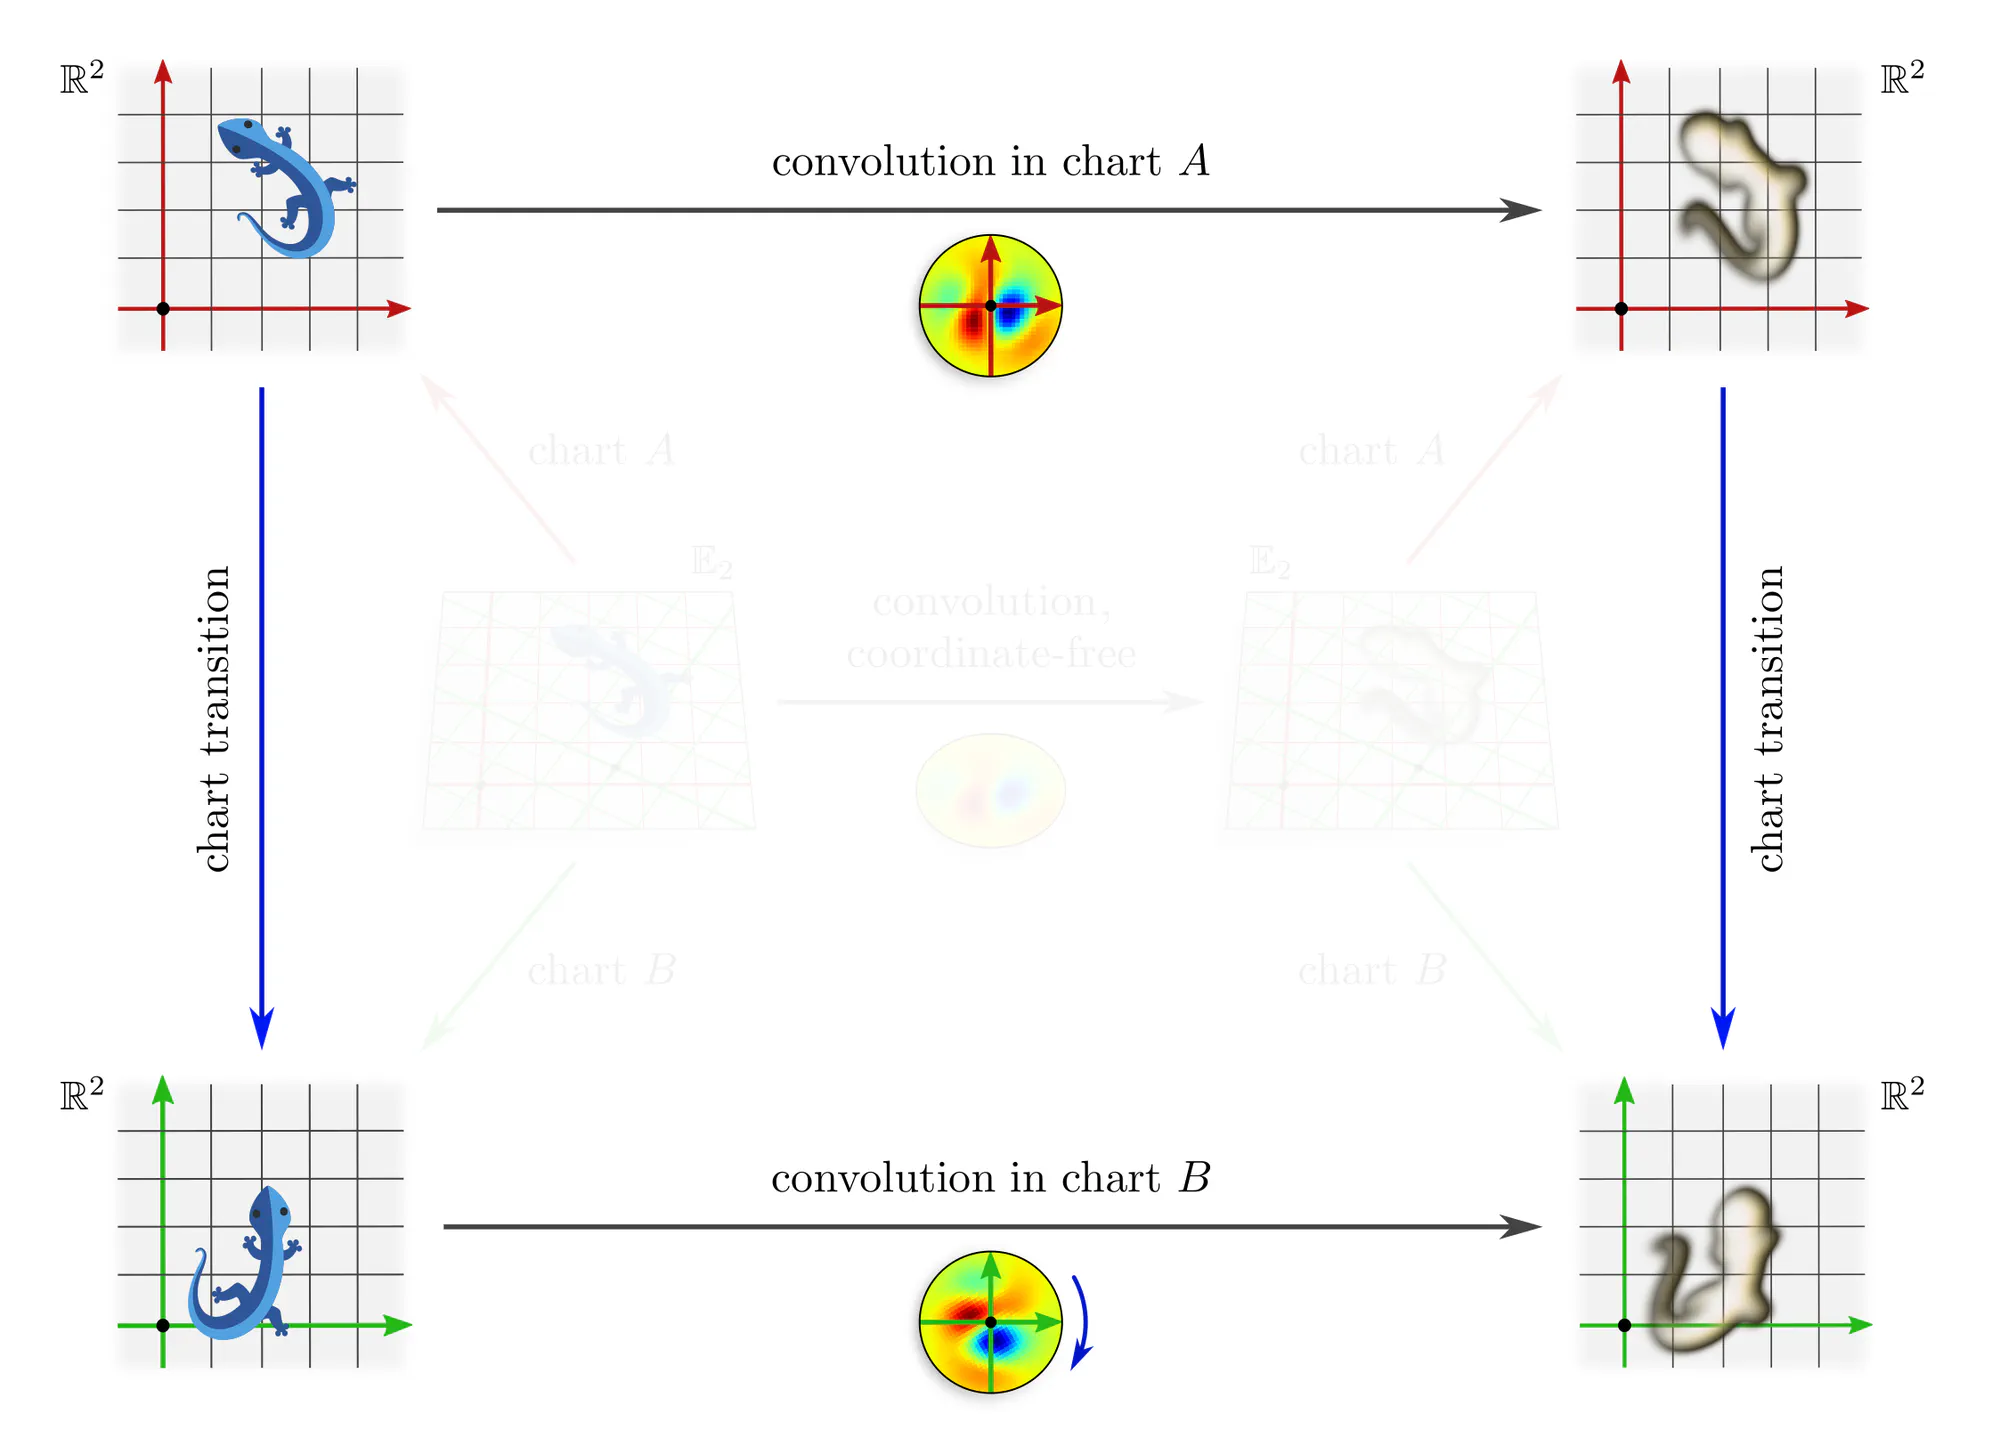 Covariant expression of a convolution operation in different charts, slide 5